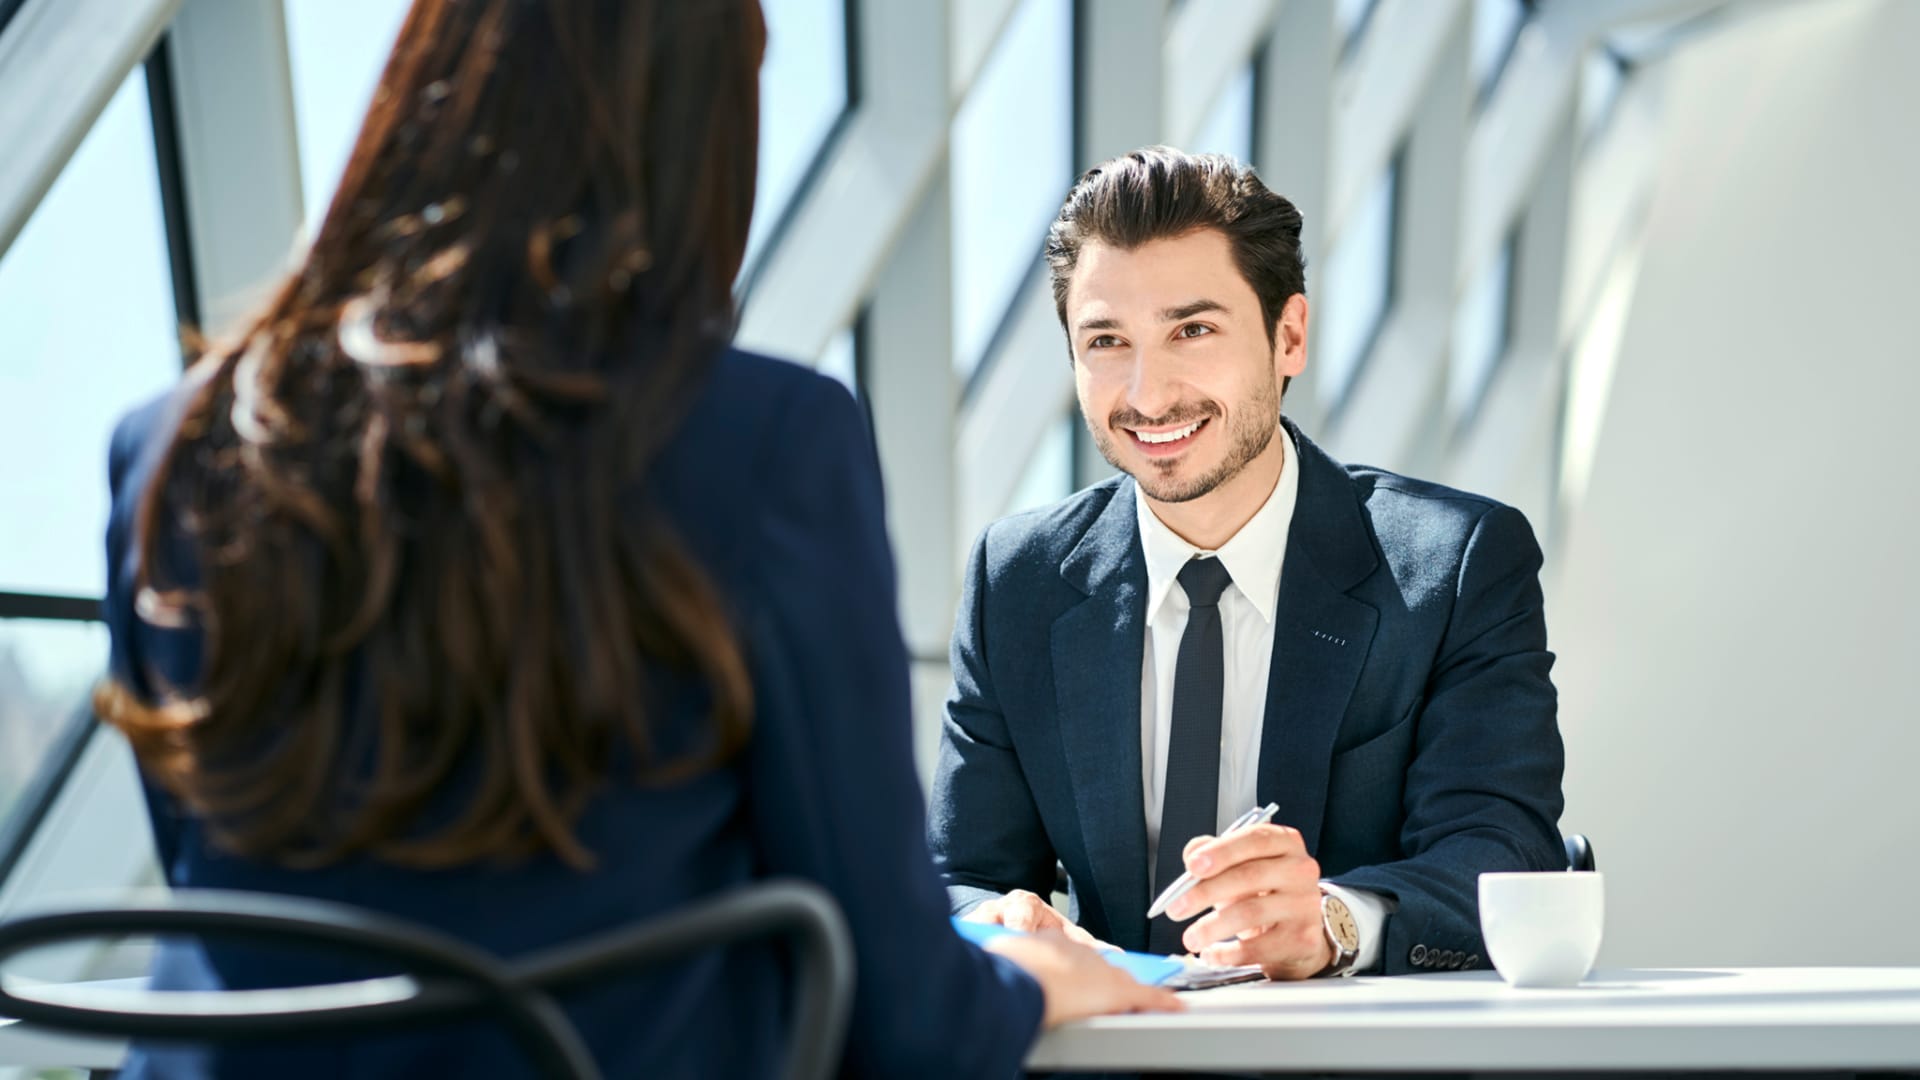 These 4 Job Interview Questions Reveal Employees With High EQ and Critical Thinking Skills